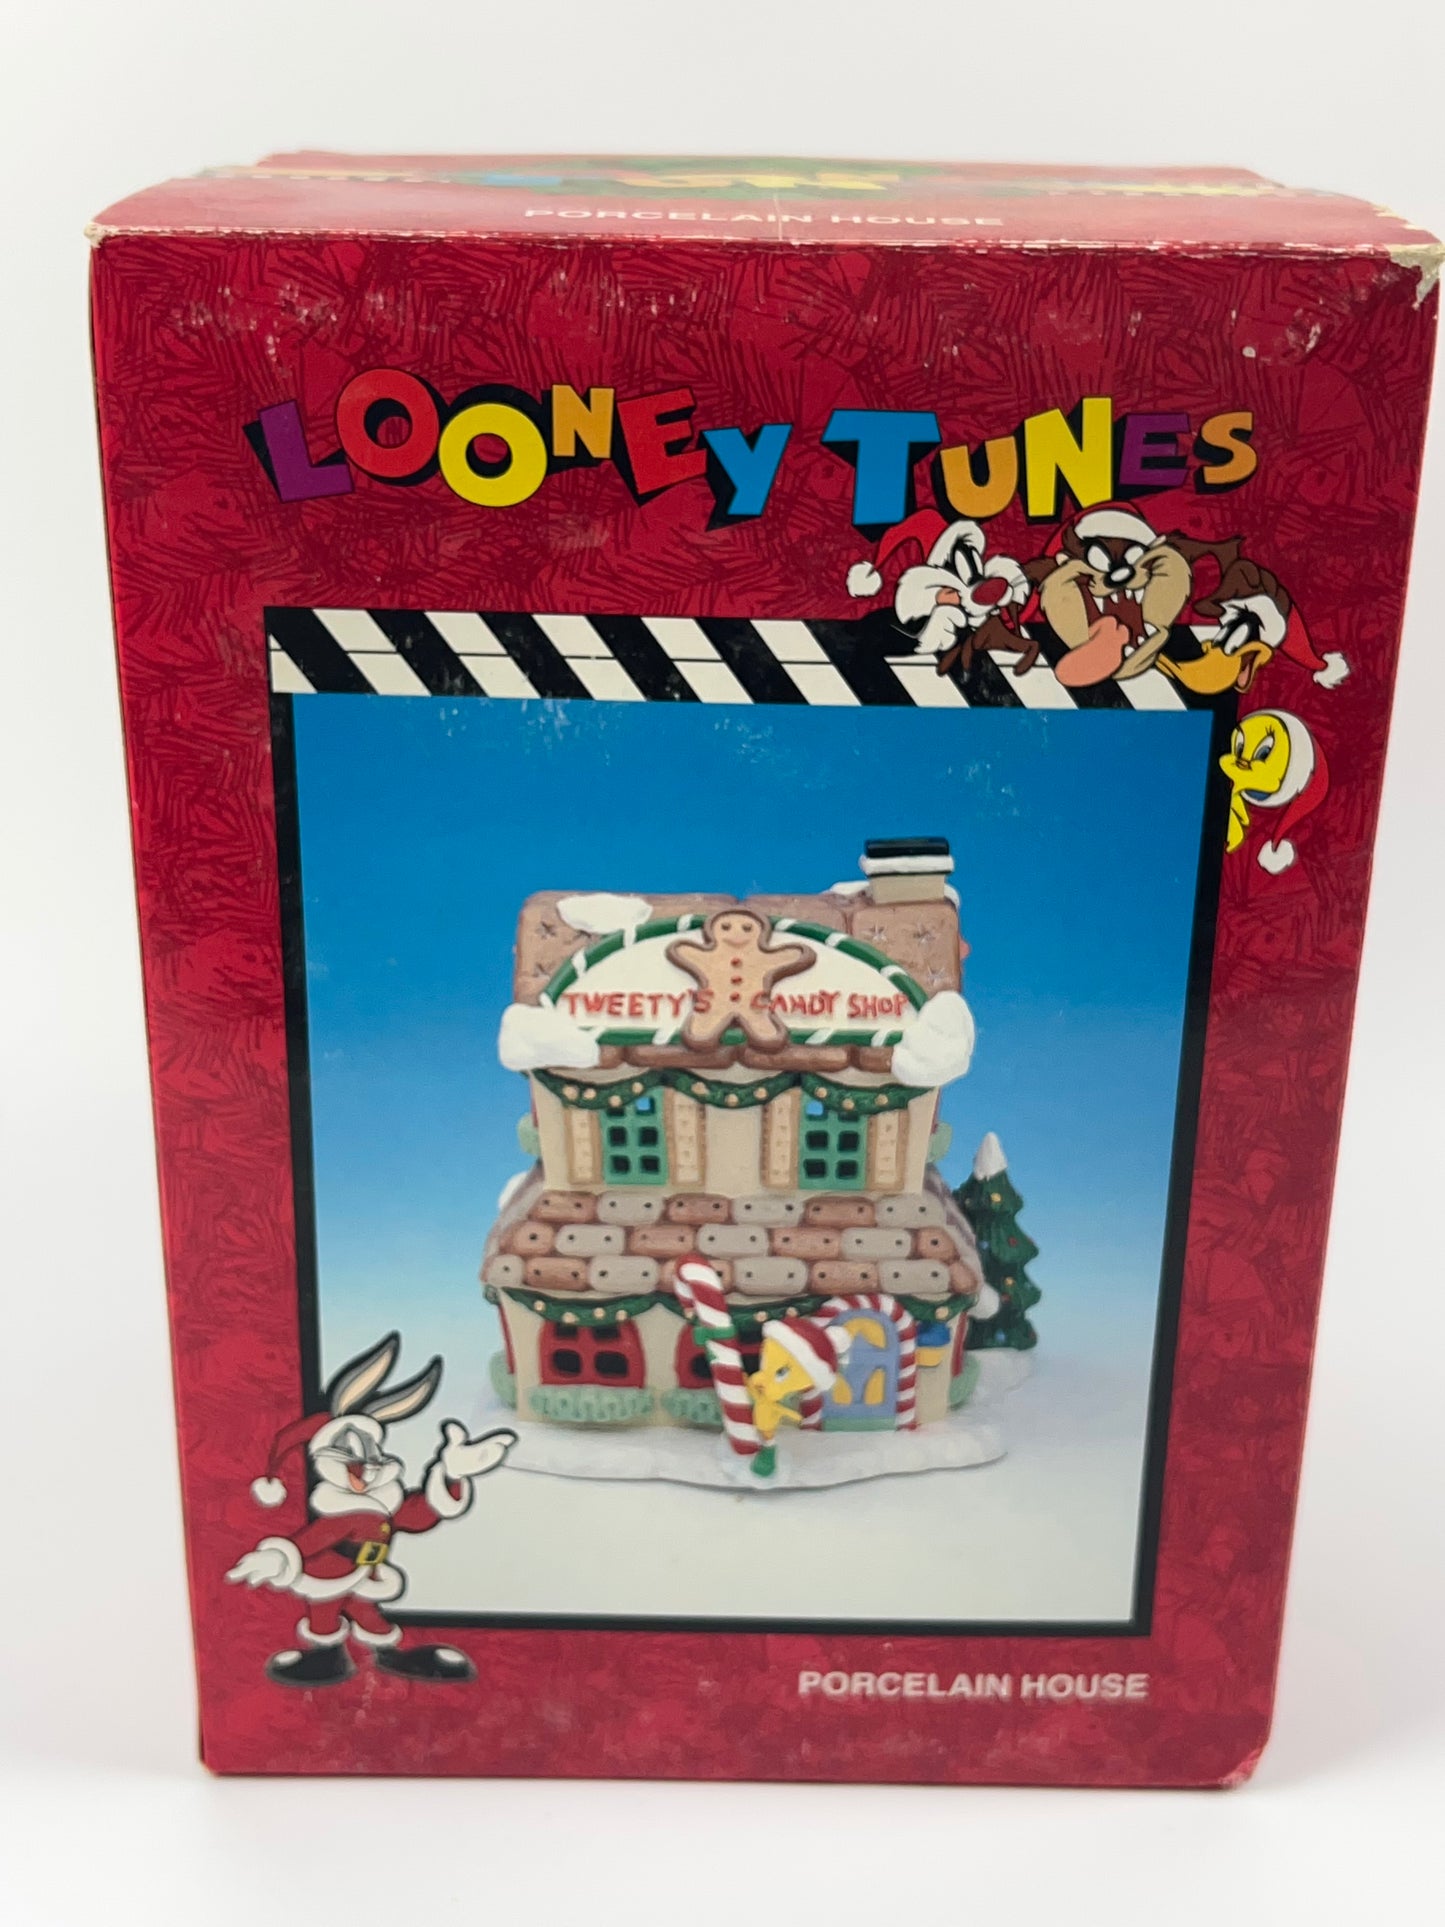 Looney Tunes 1996 Tweety's Candy Shop Lighted Porcelain House Vtg Christmas